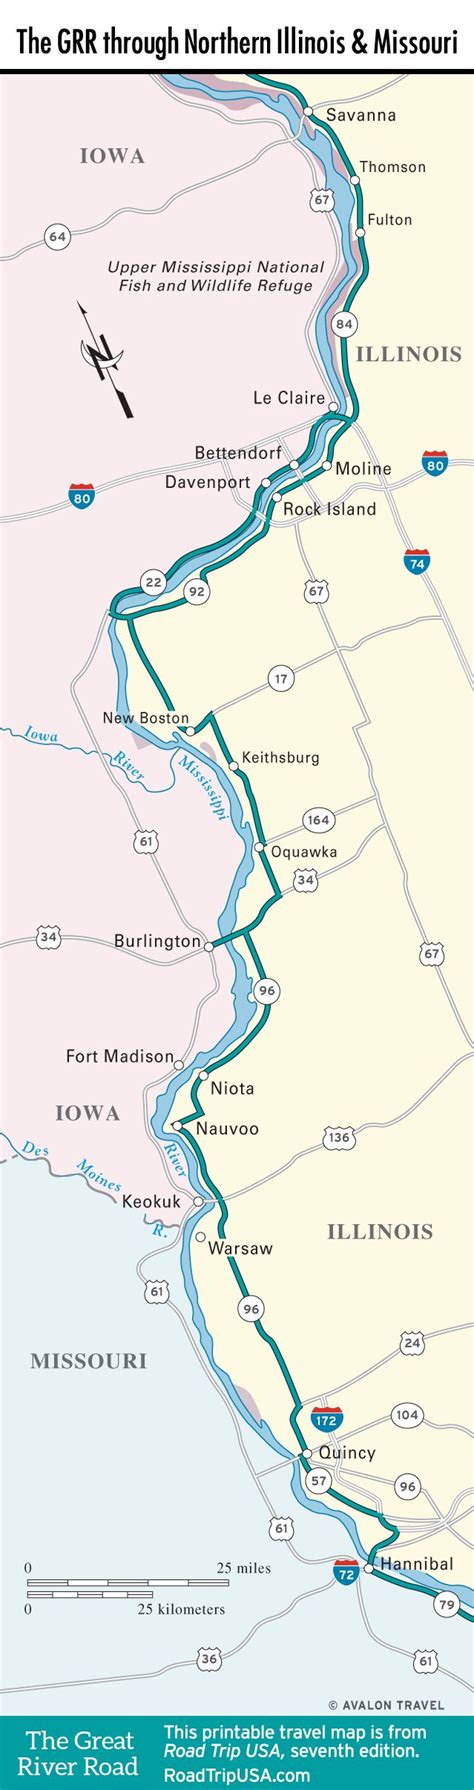 Map Of The Great River Road Through Northern Illinois Iowa And